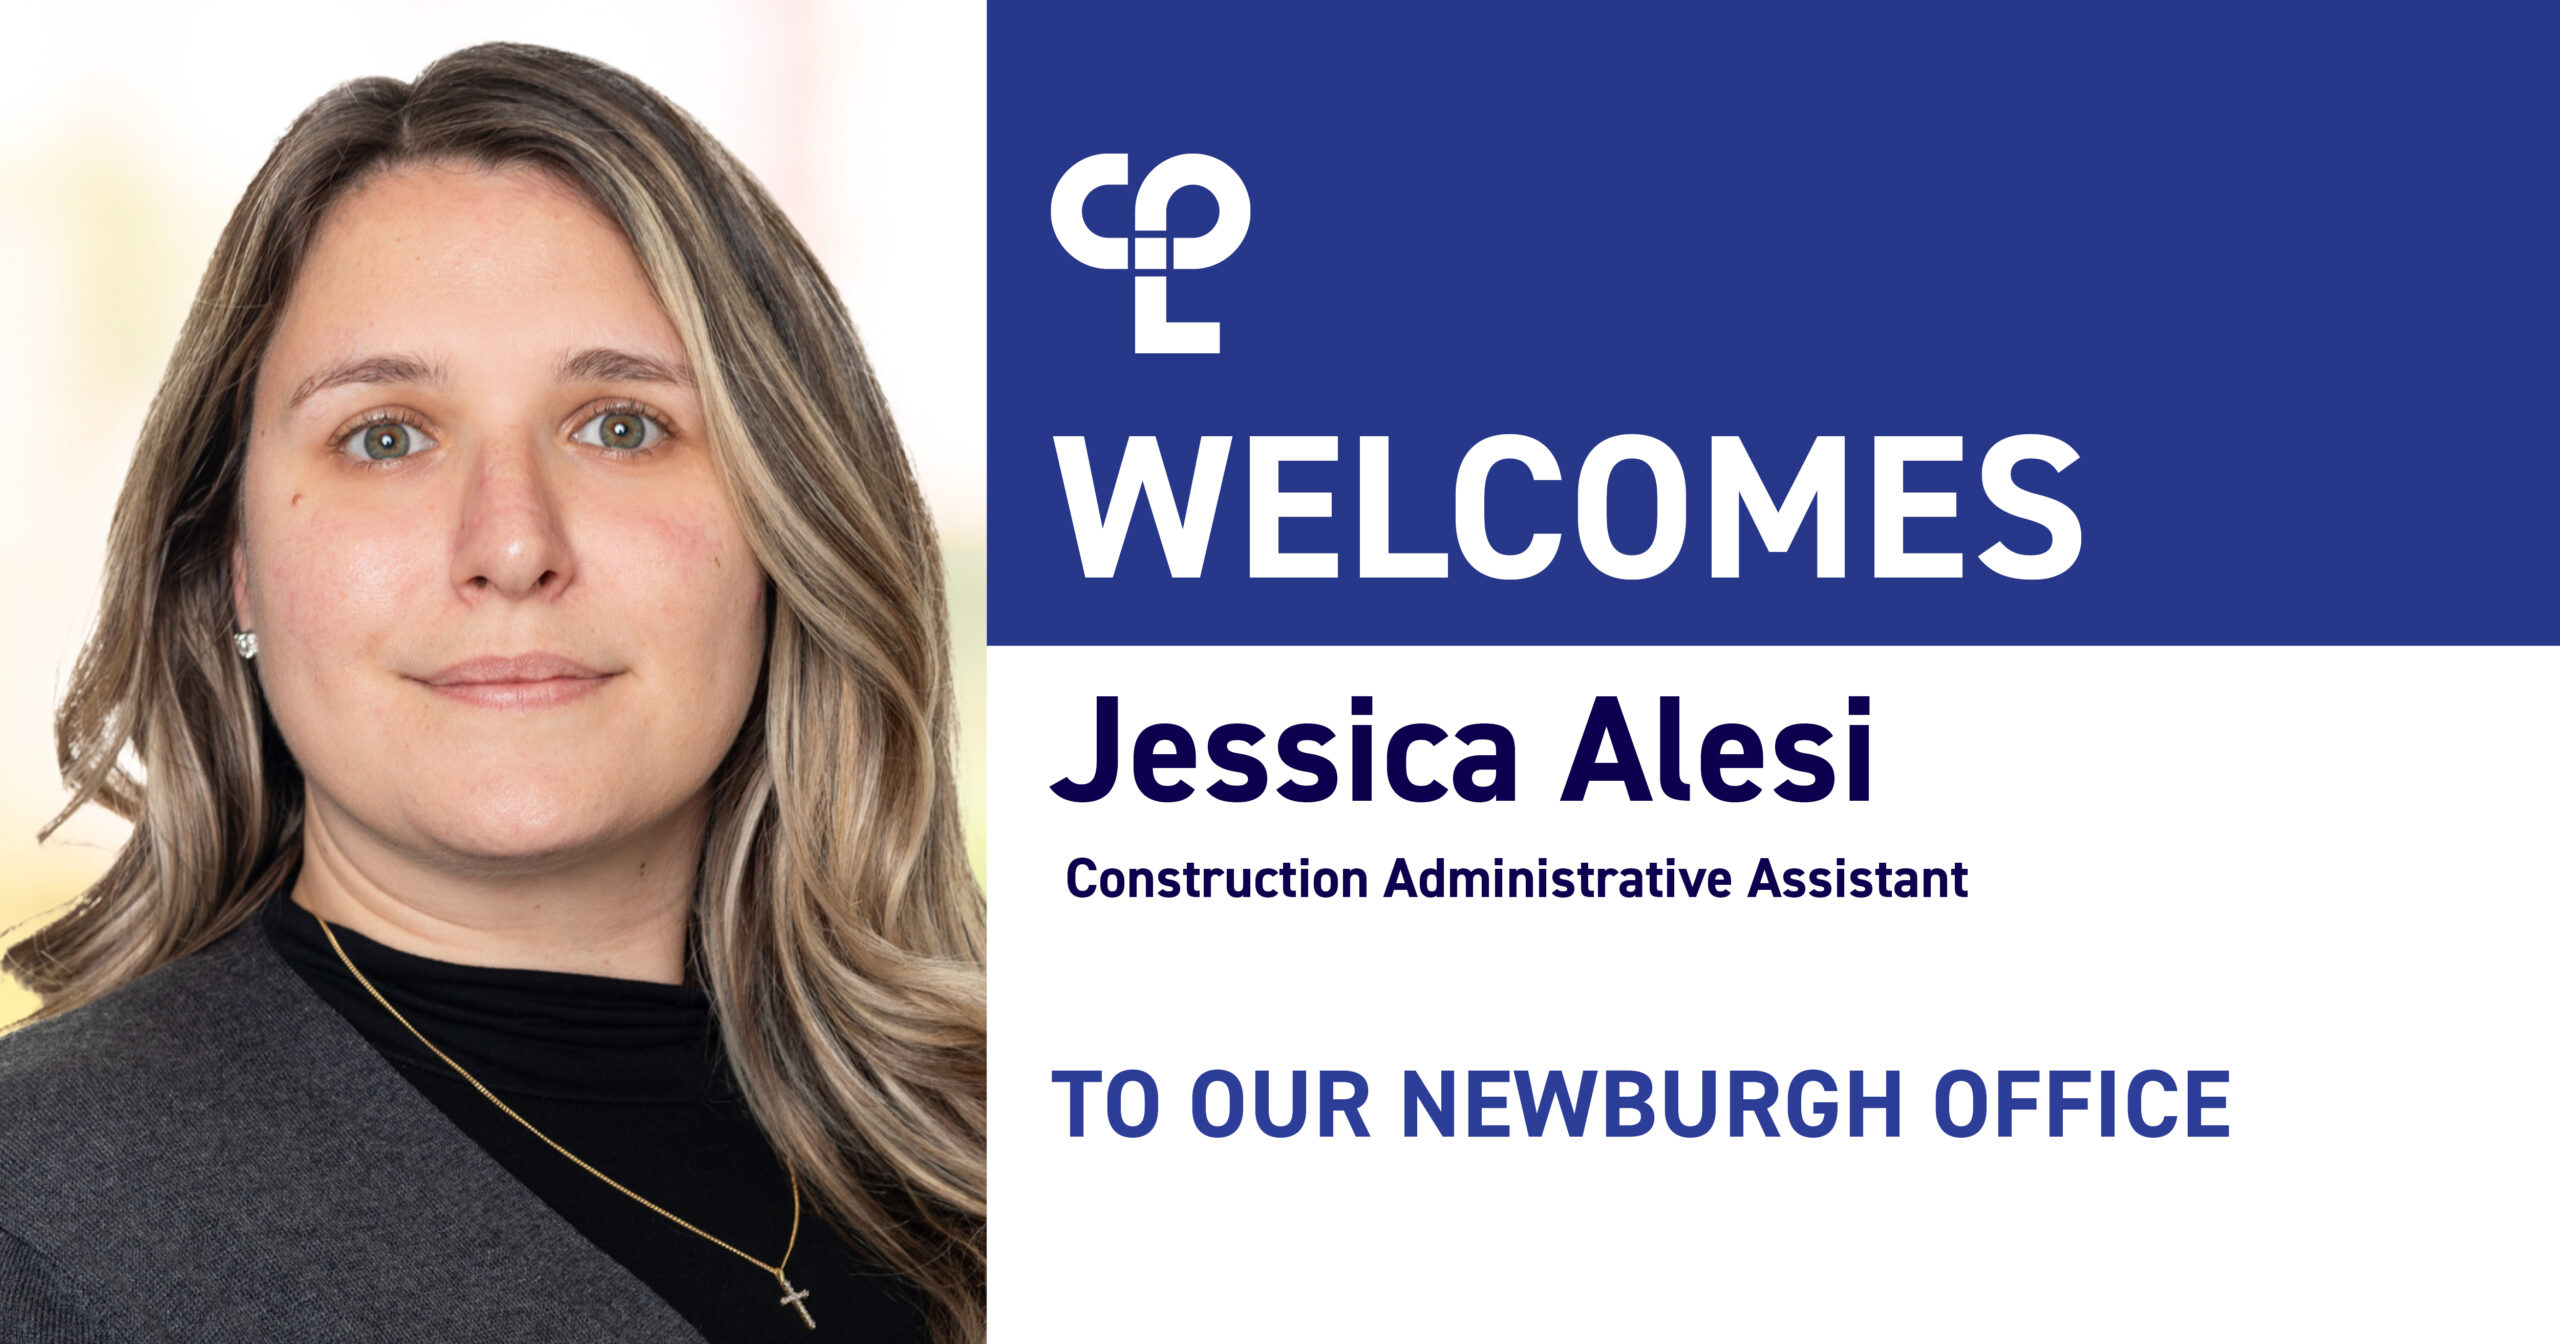 Welcome to our Newburgh office. CPL welcomes new team member, Jessica Alesi.